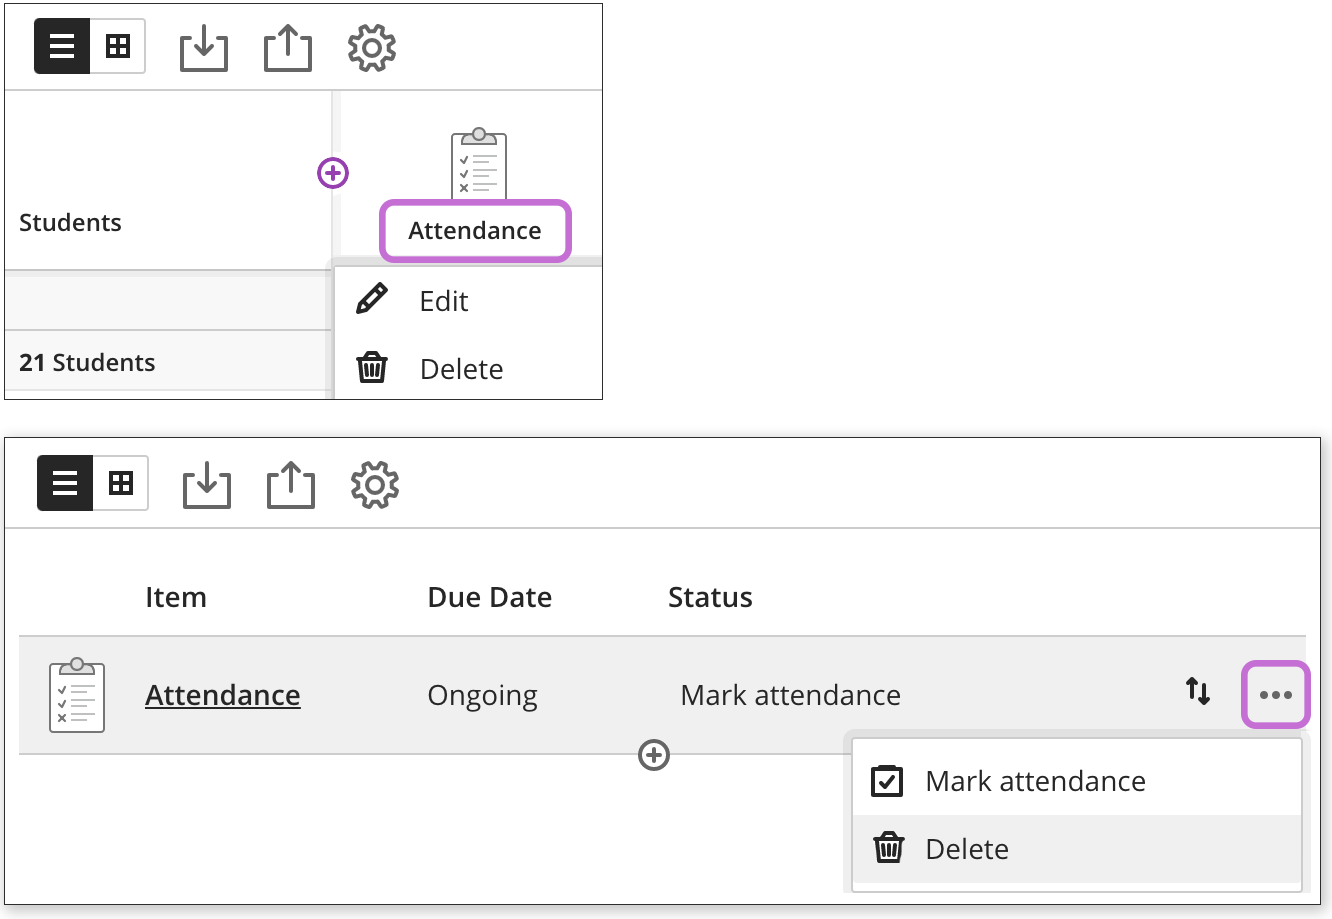 Delete option in the attendance options menu